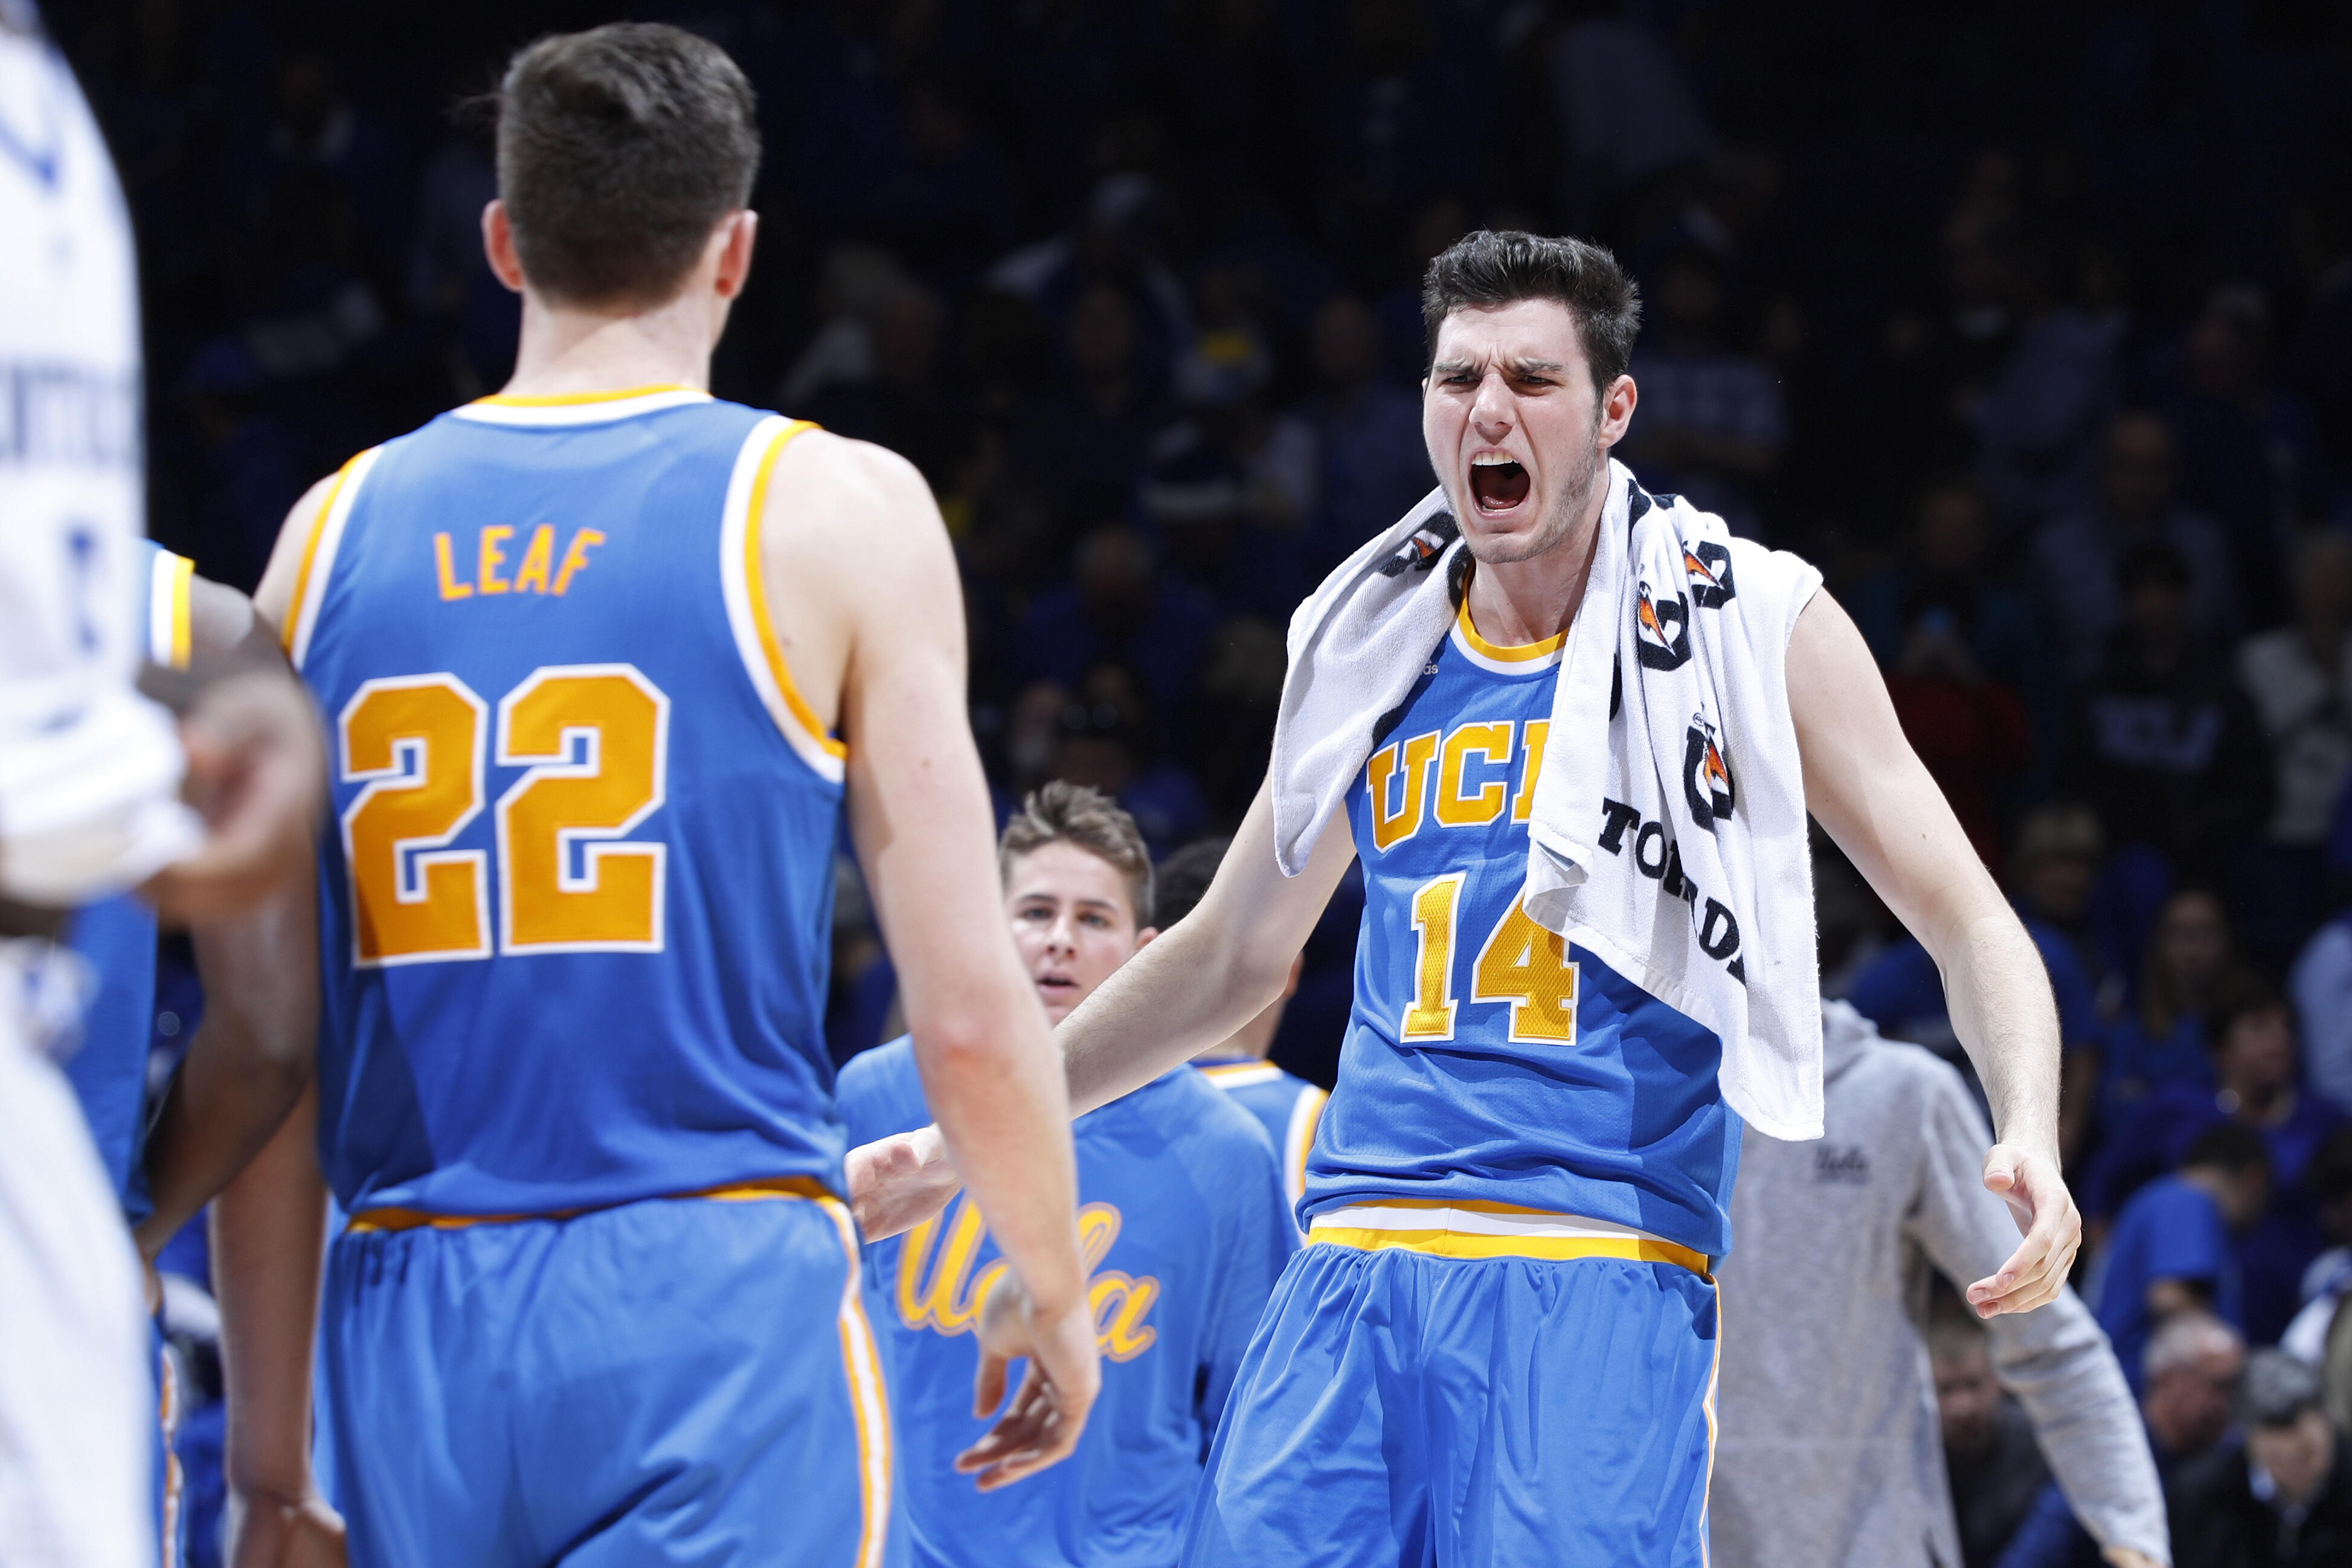 LEXINGTON, KY - DECEMBER 03: Gyorgy Goloman #14 of the UCLA Bruins reacts as time runs out in the game against the Kentucky Wildcats at Rupp Arena on December 3, 2016 in Lexington, Kentucky. UCLA defeated Kentucky 97-92. (Photo by Joe Robbins/Getty Images